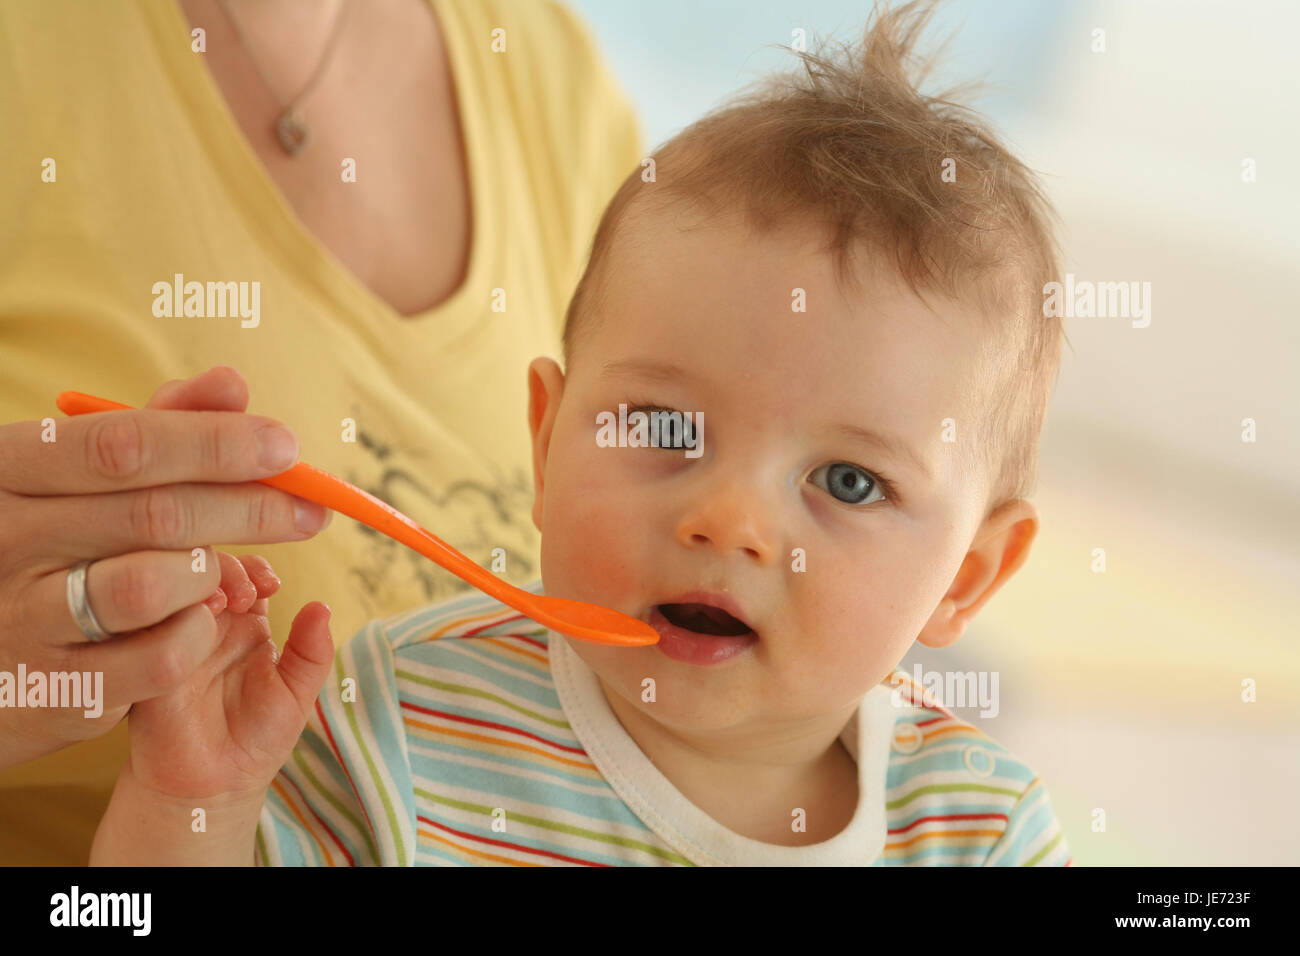 Nut, baby, 7 months, feed, is surprised, dressed, eat, Indoor, boy, curiosity, spoons, hunger, view, portrait, deflection, person, woman, Stock Photo